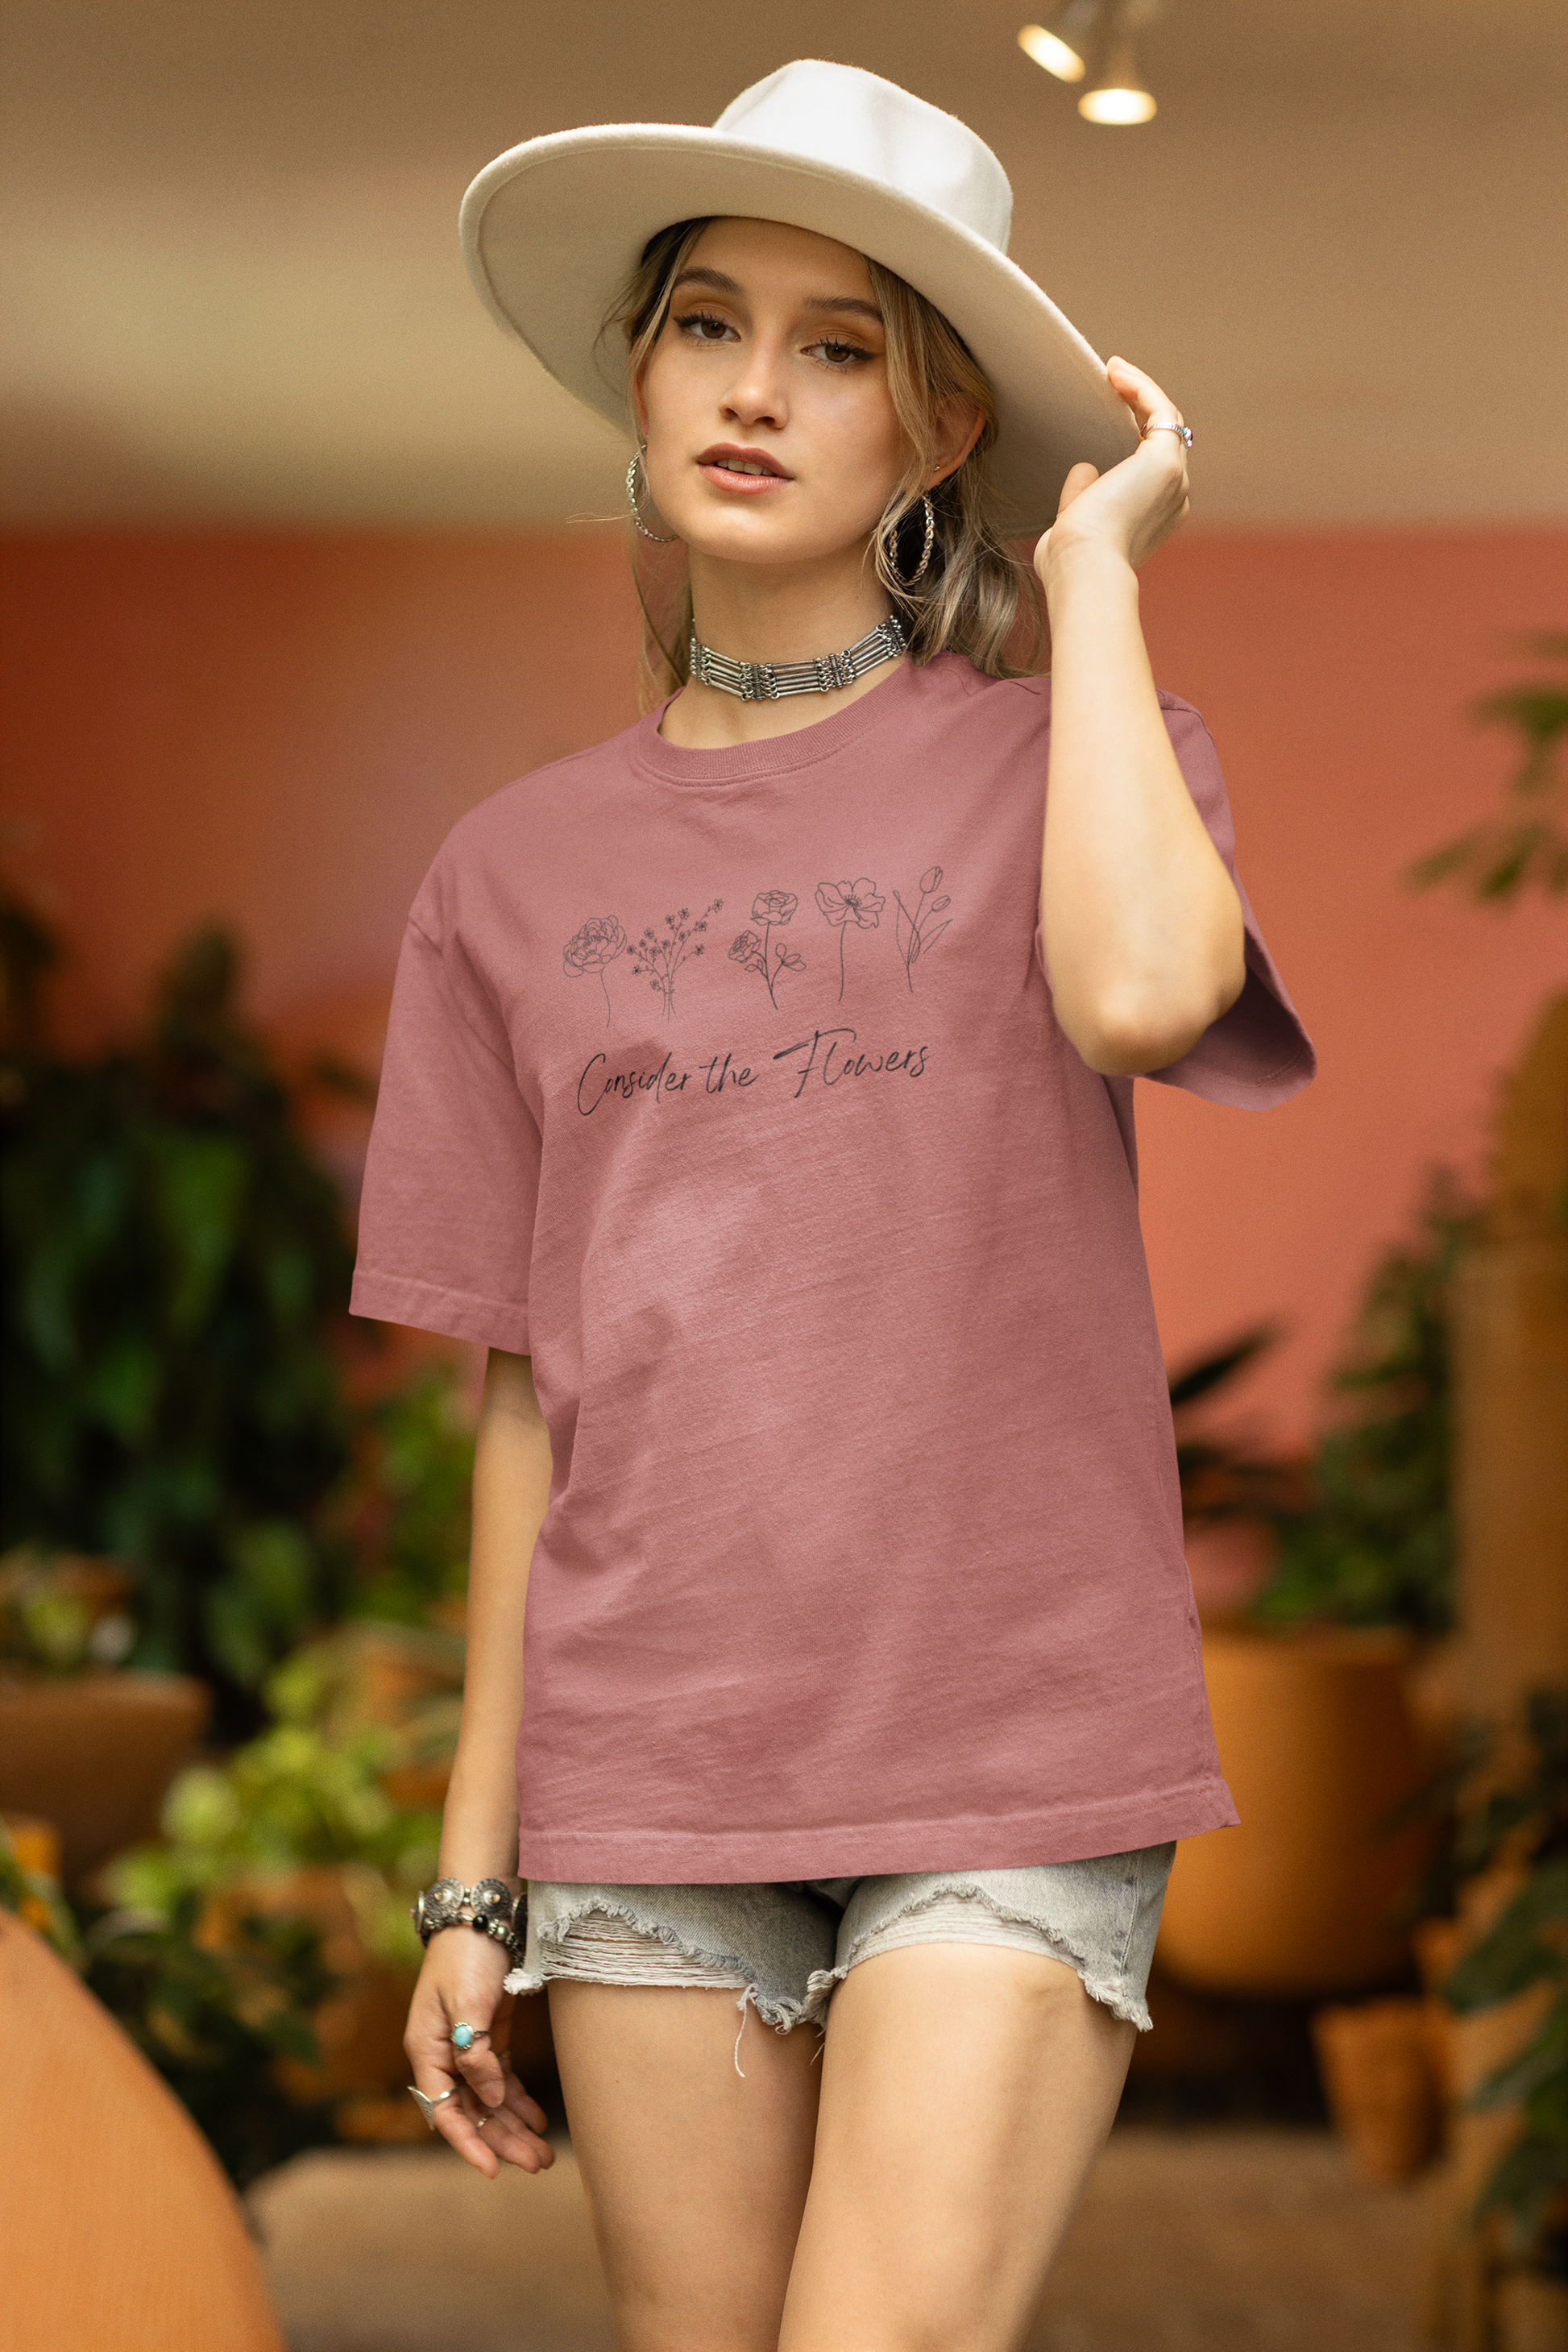 Floral Graphic Tee - Christian T Shirt for Women - Small Heather Mauve